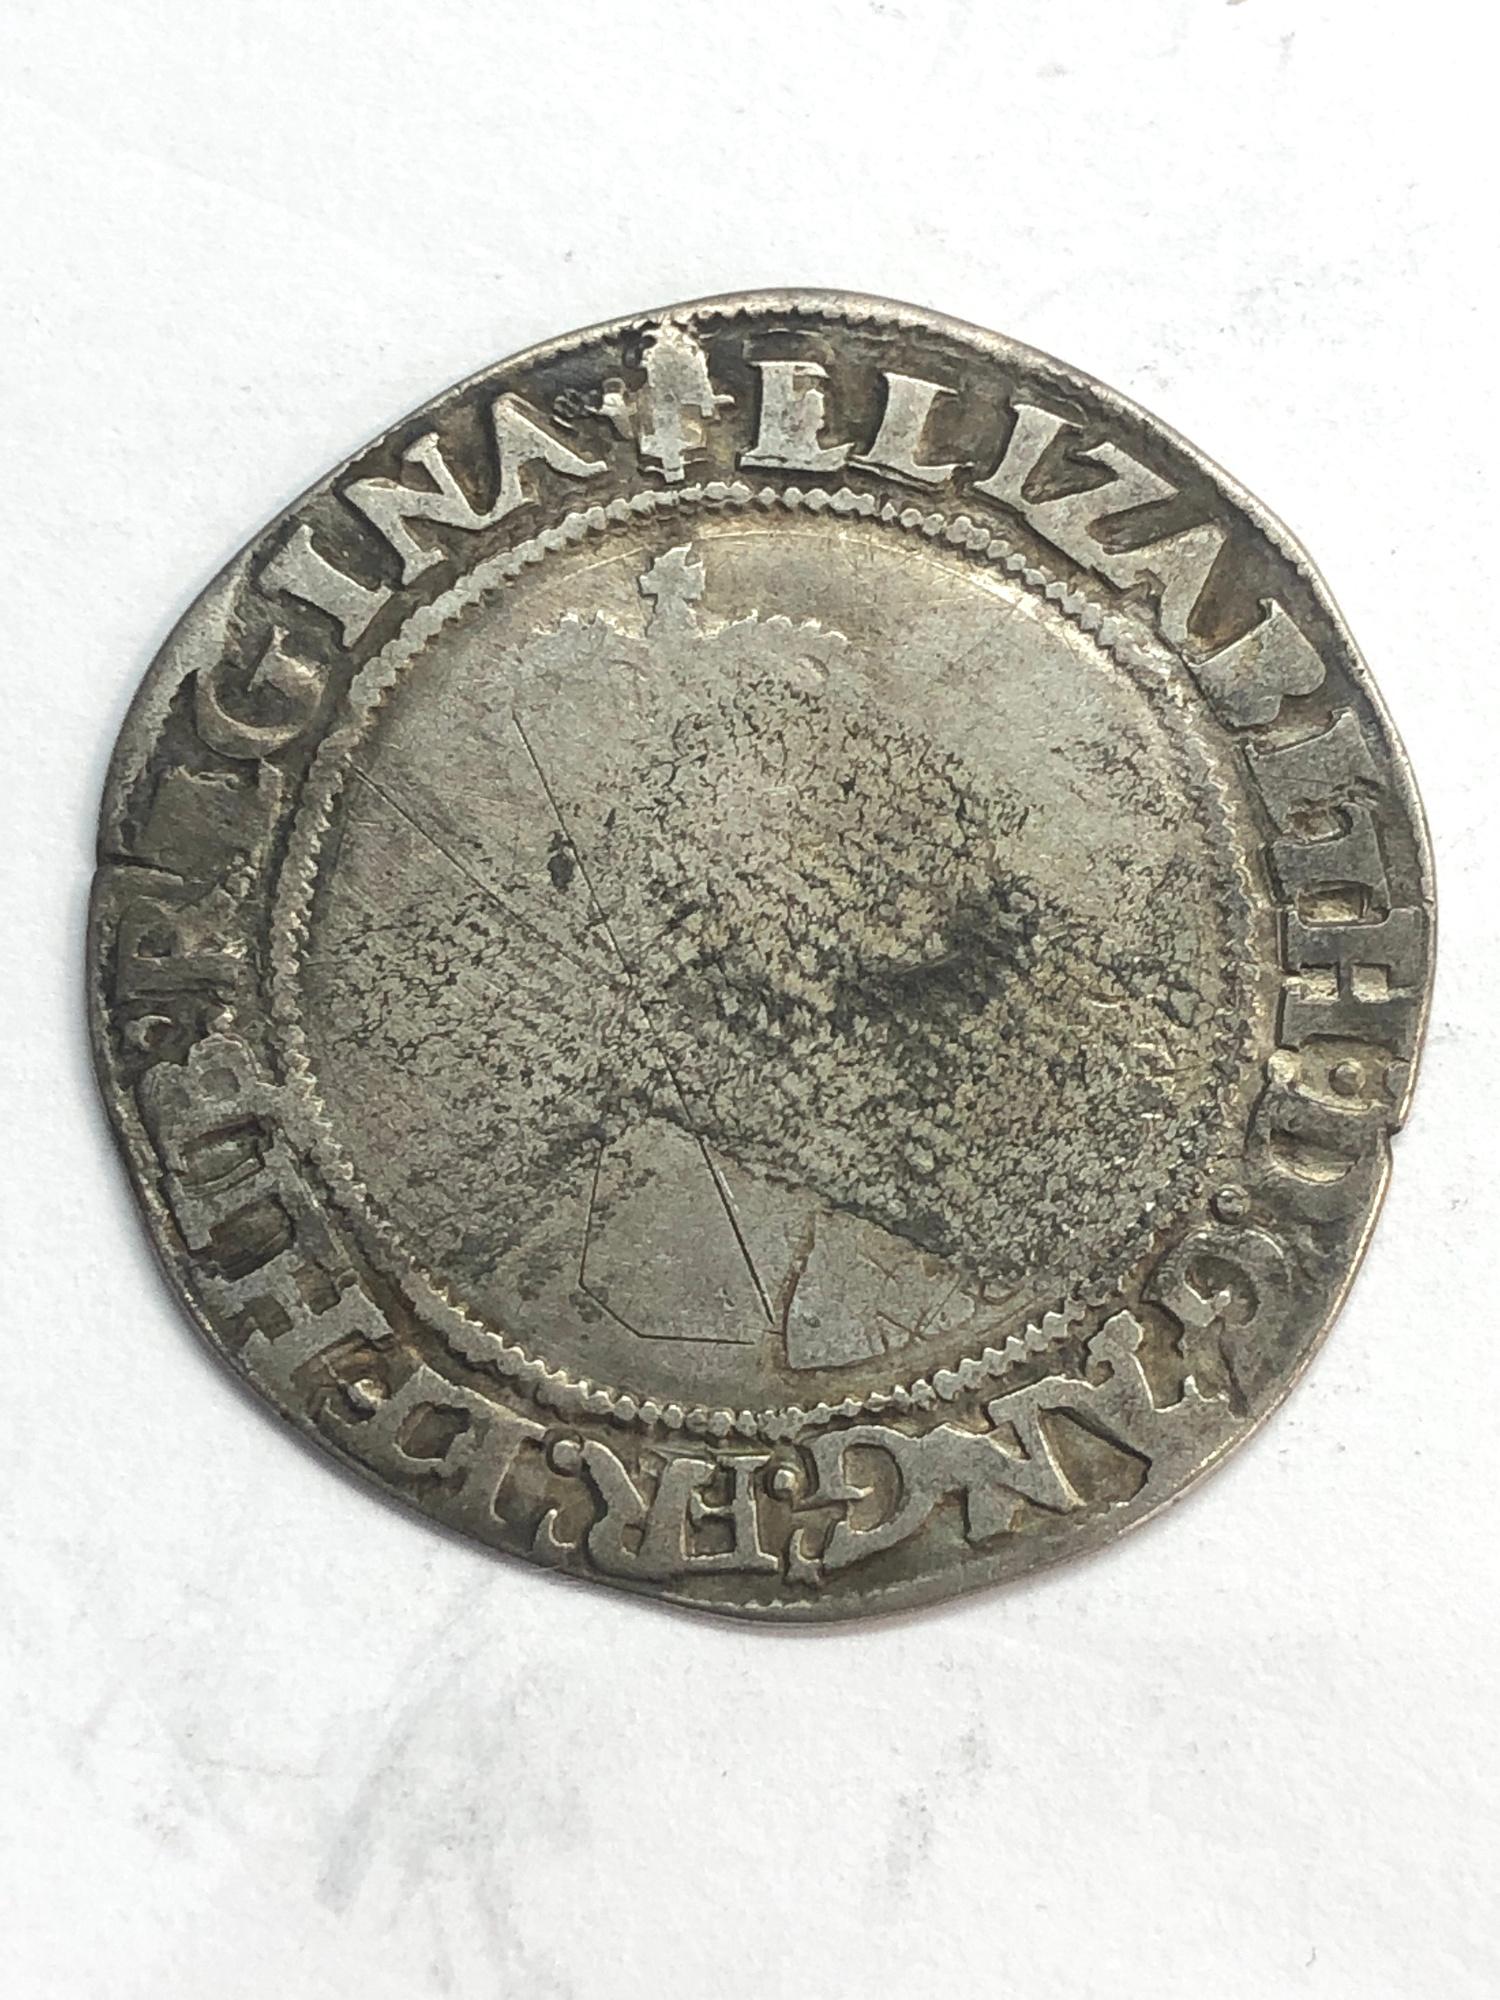 Elizabeth 1st silver coin measures approx 33mm dia weight 7.7g please see images for grade and - Image 2 of 2